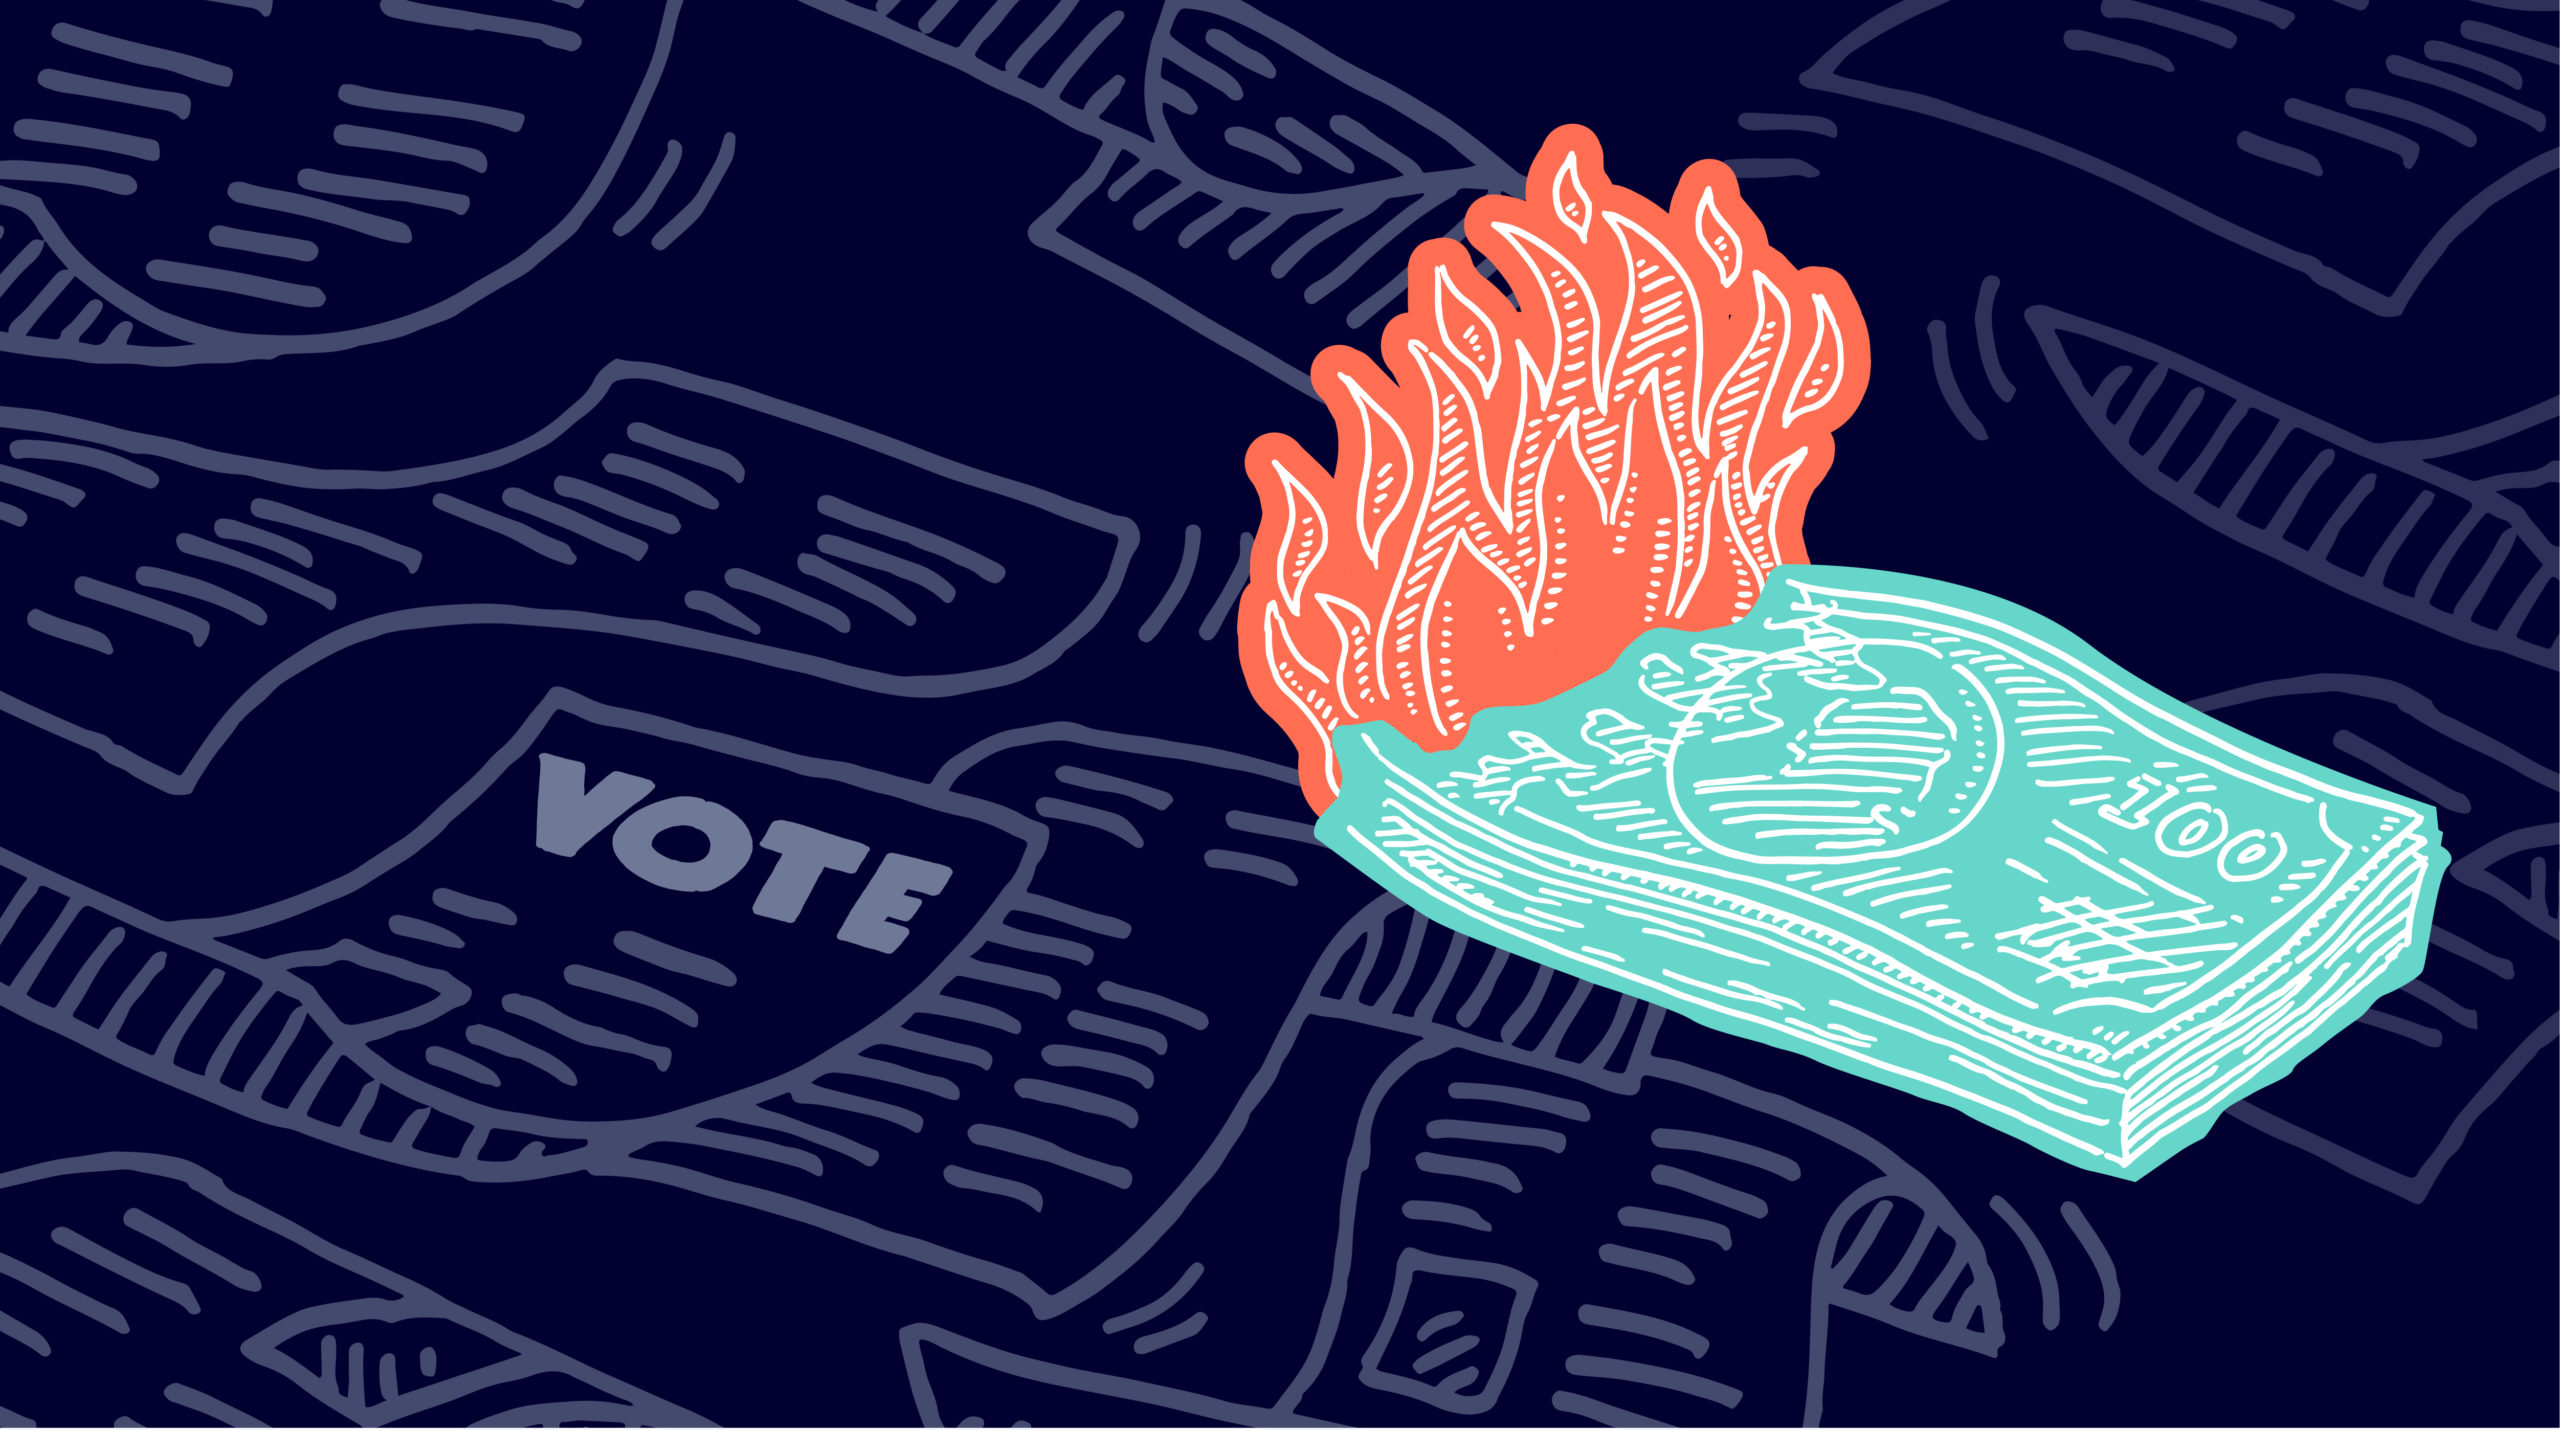 dollar bill on fire, over a background of navy blue voting slips